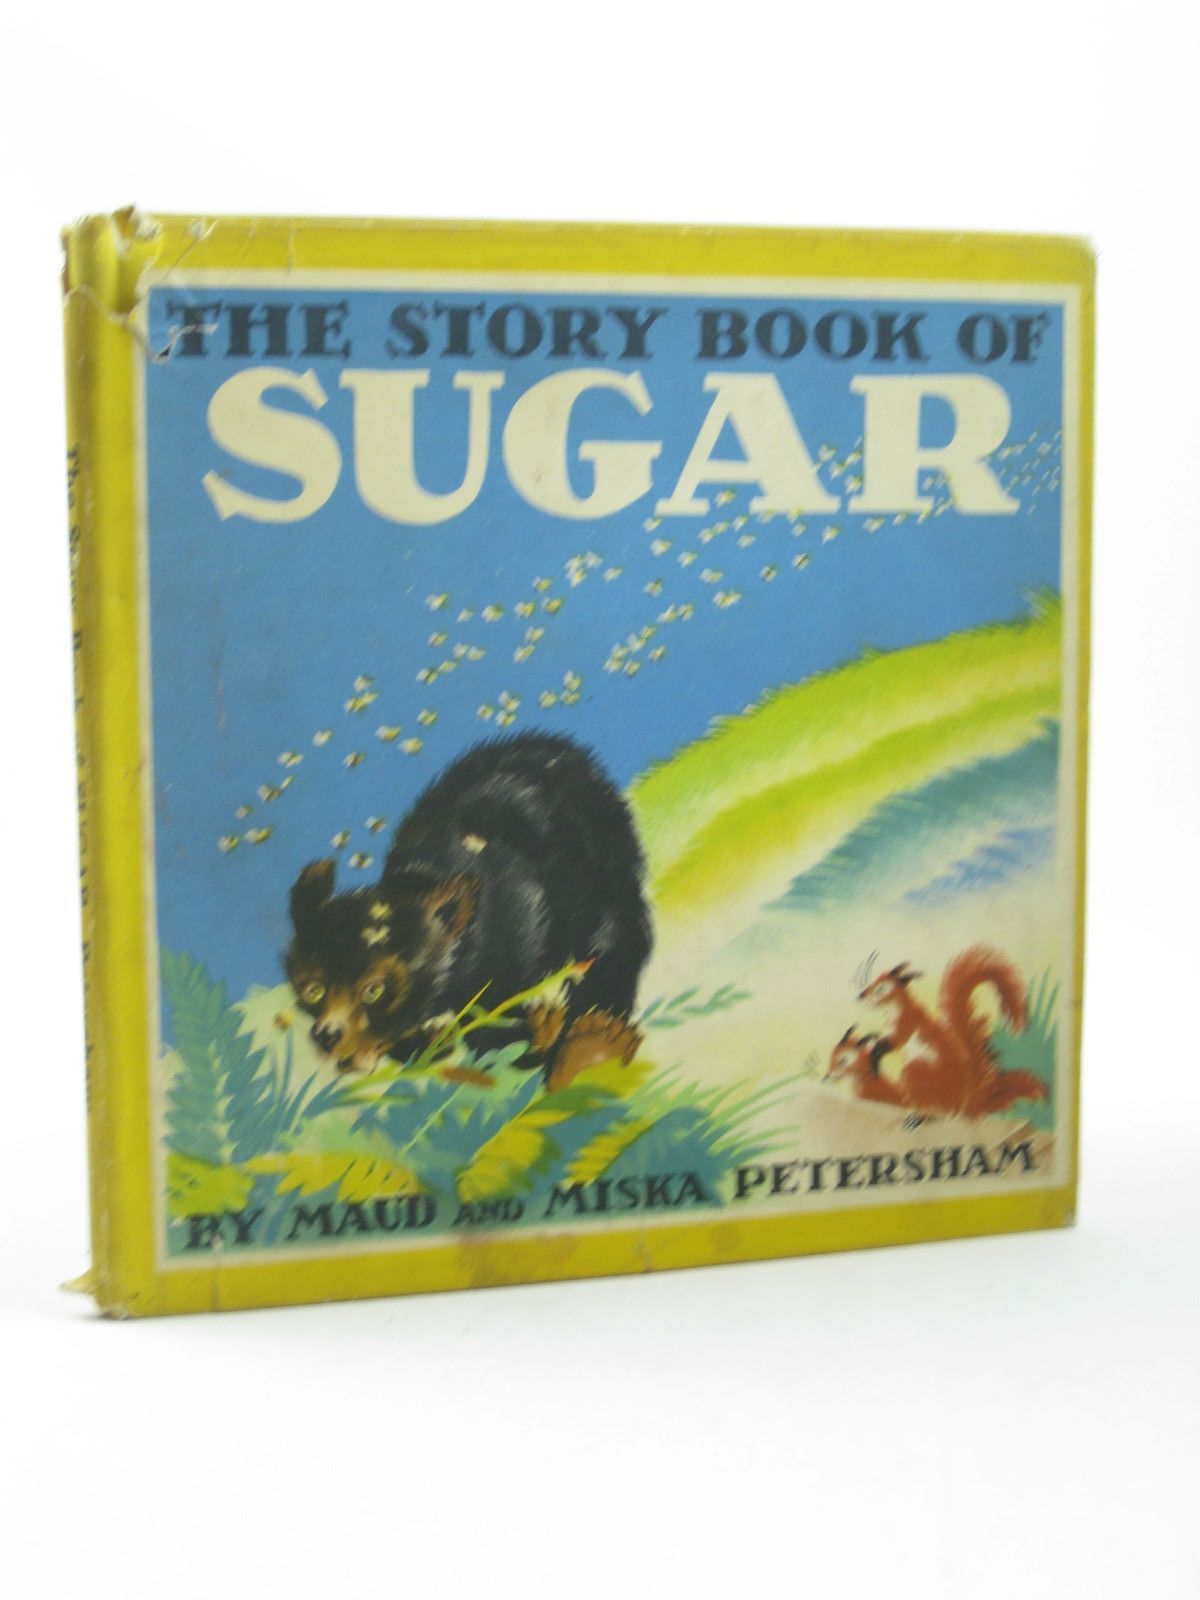 Photo of THE STORY BOOK OF SUGAR written by Petersham, Maud Petersham, Miska illustrated by Petersham, Maud Petersham, Miska published by Wells Gardner, Darton &amp; Co. Ltd. (STOCK CODE: 1312840)  for sale by Stella & Rose's Books